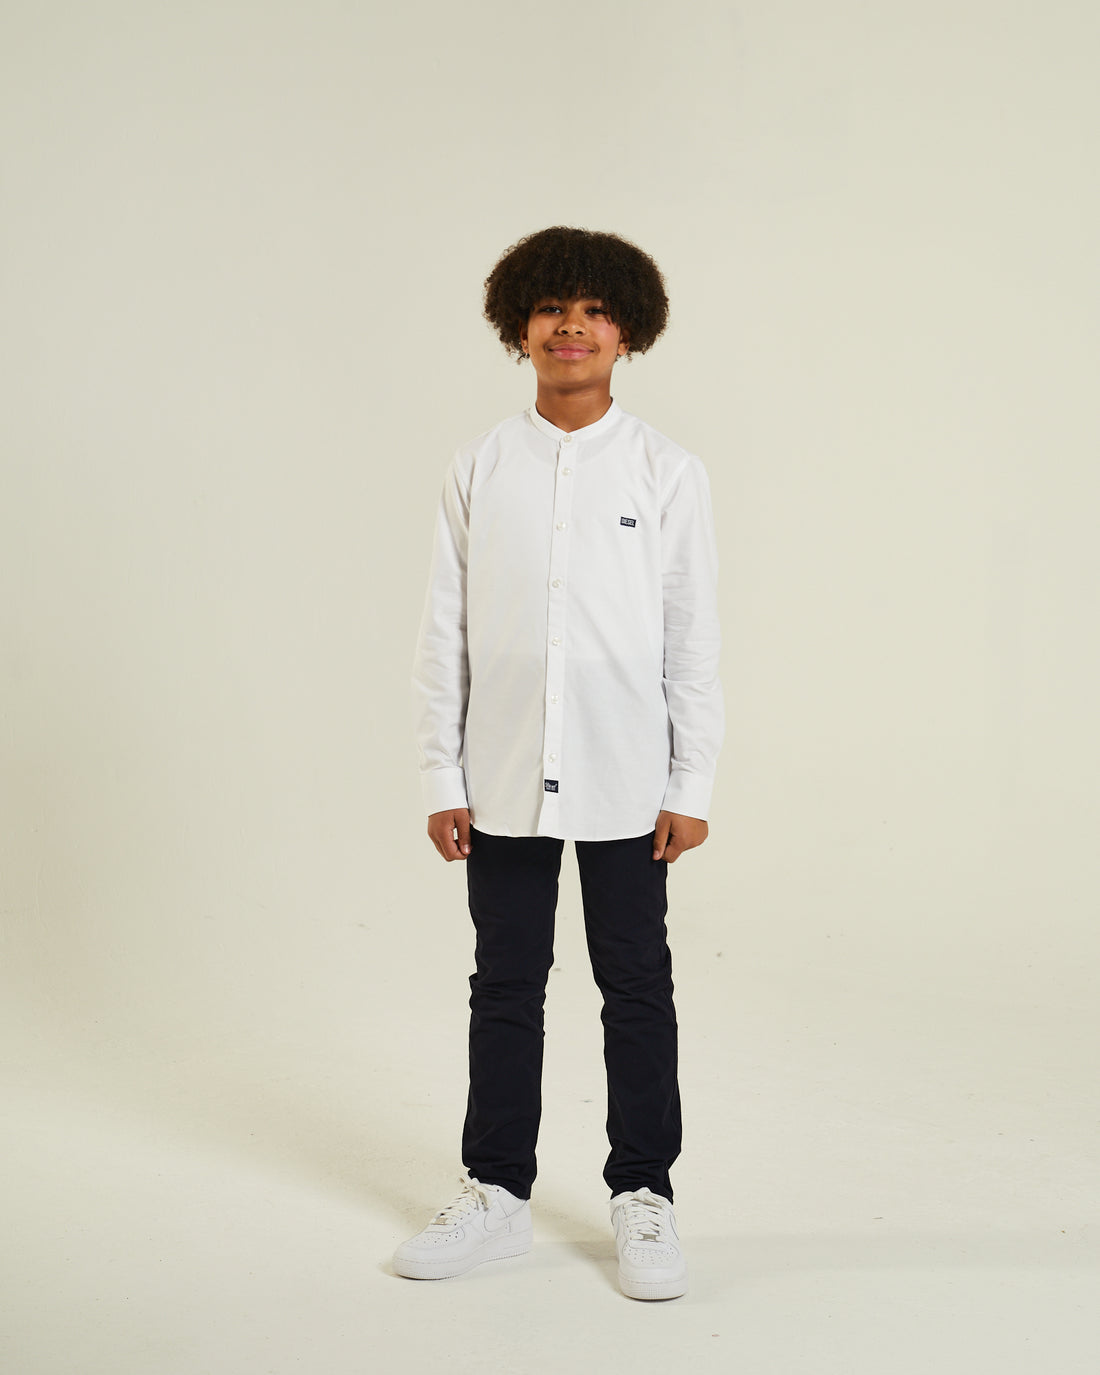 Boys Donnelly White Boys Shirt-Full Model Front View